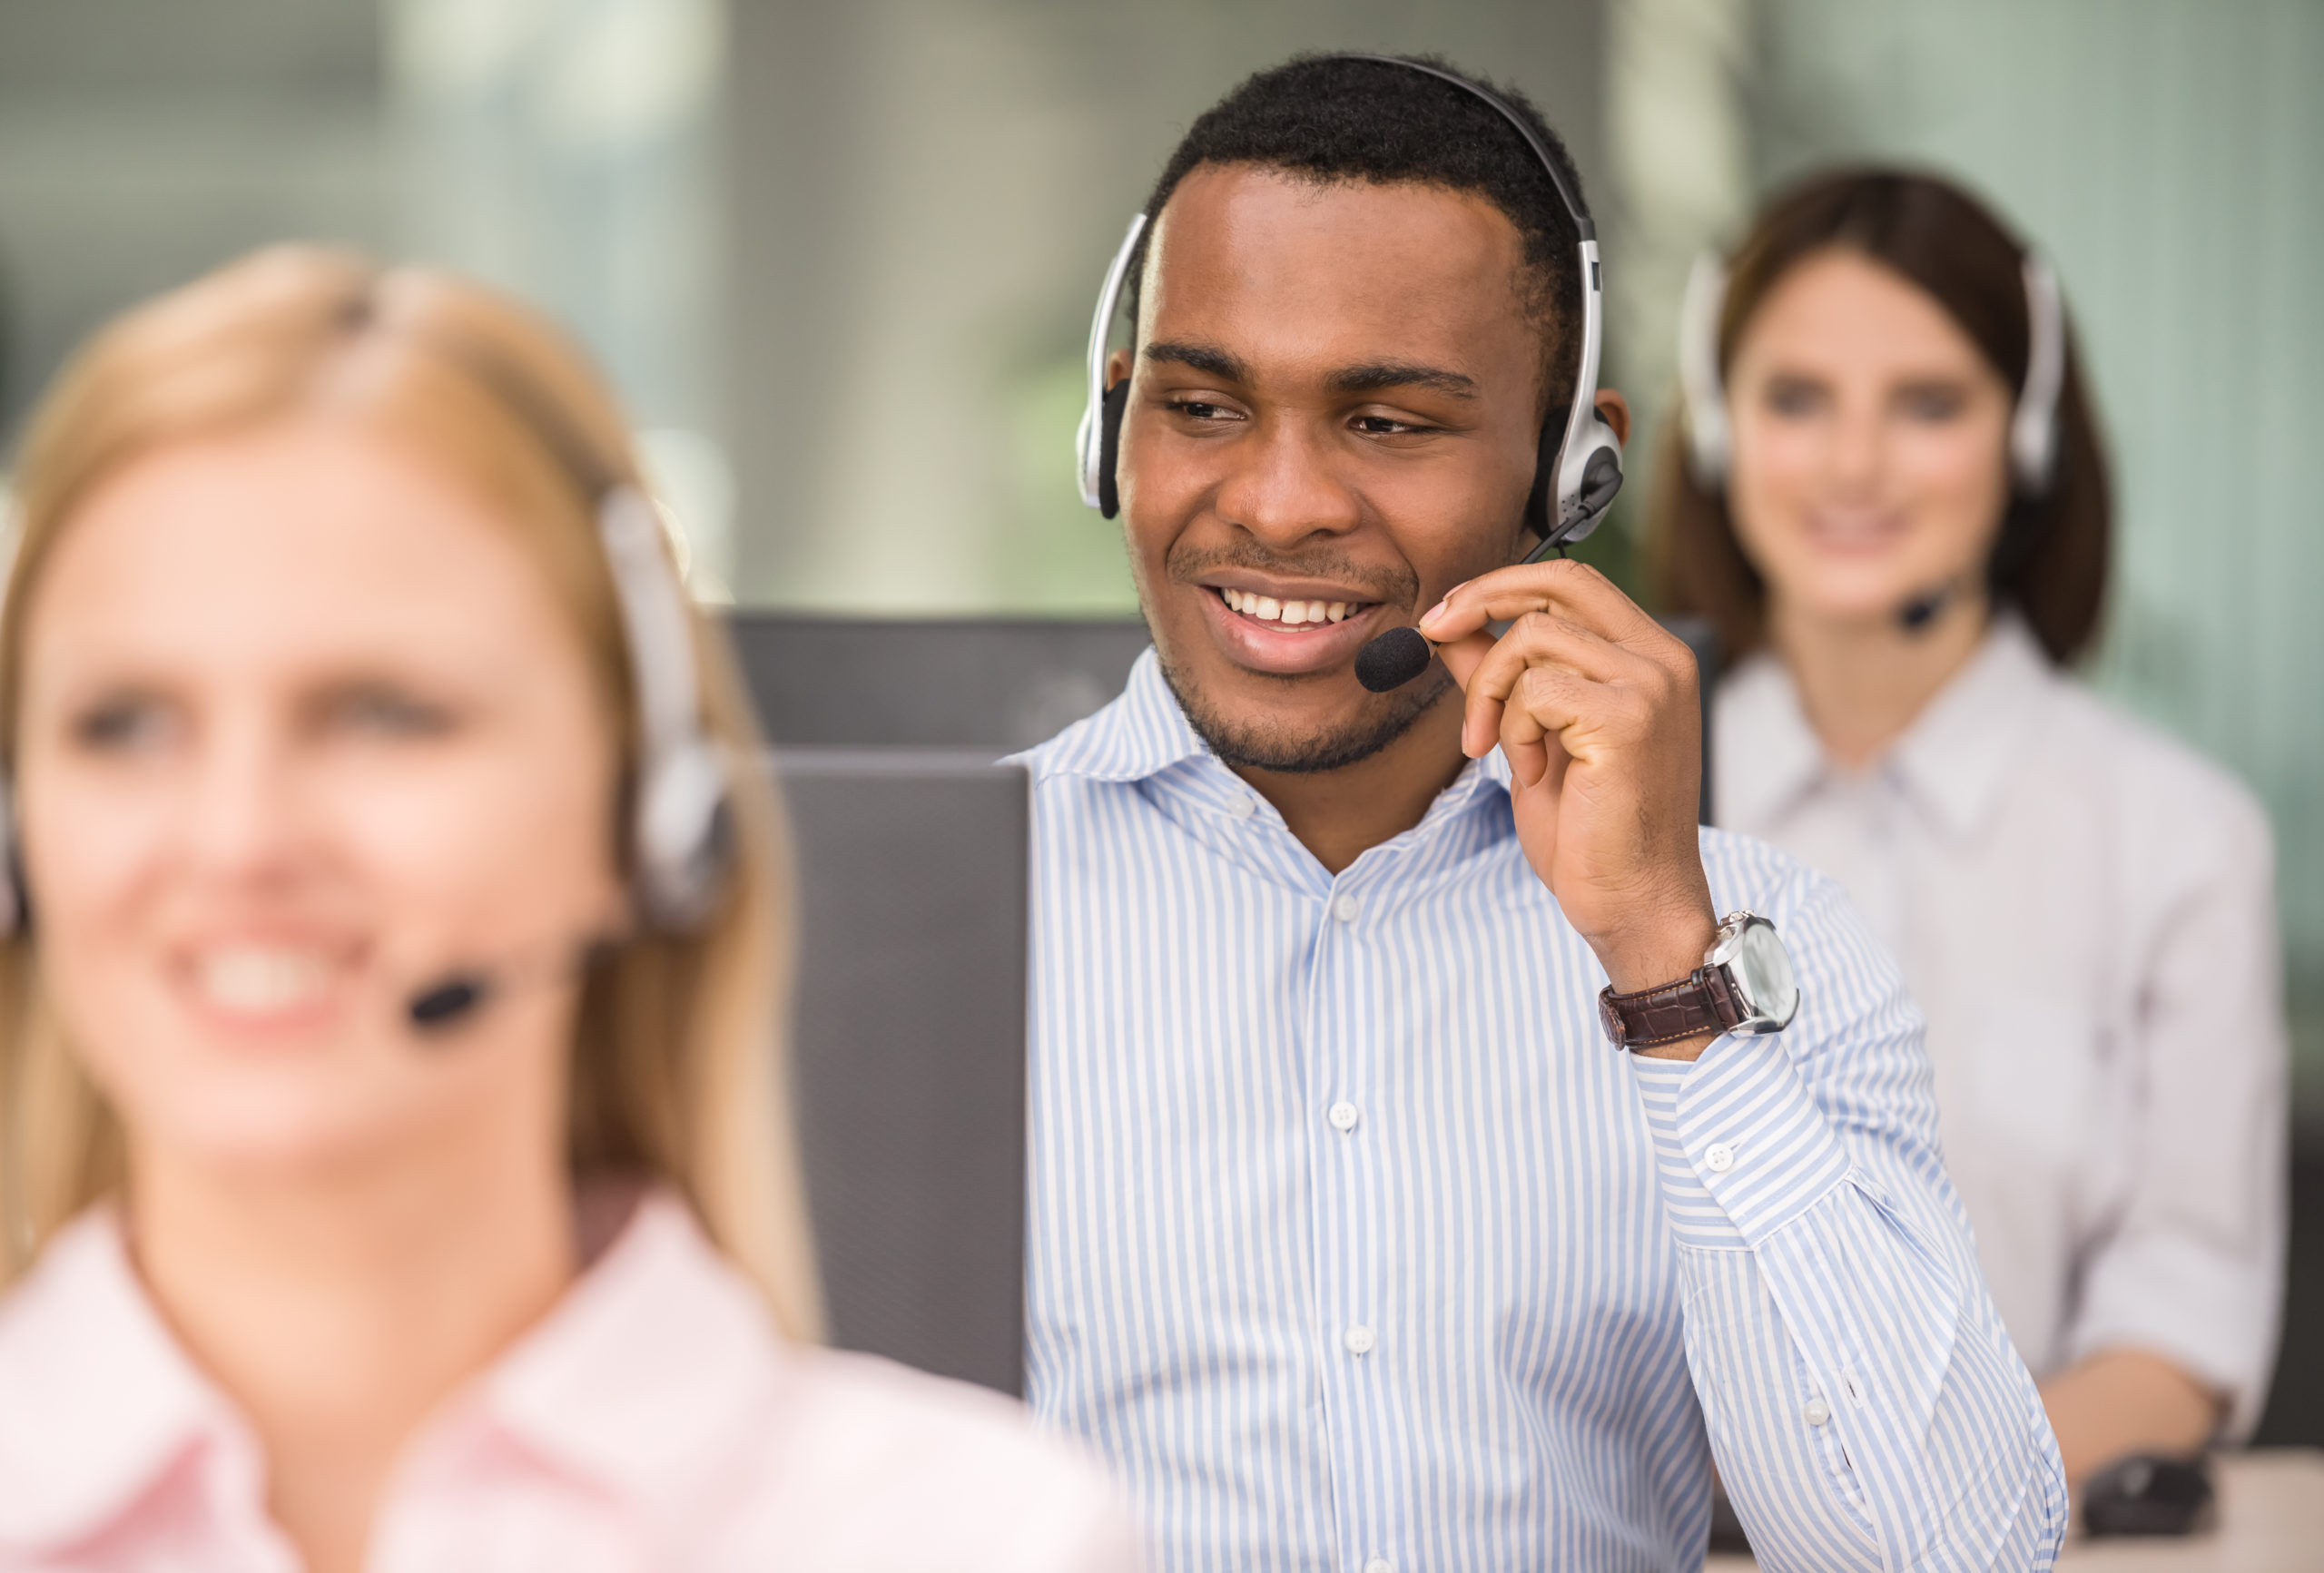 Amazon Brings More Machine Learning to the Contact Center